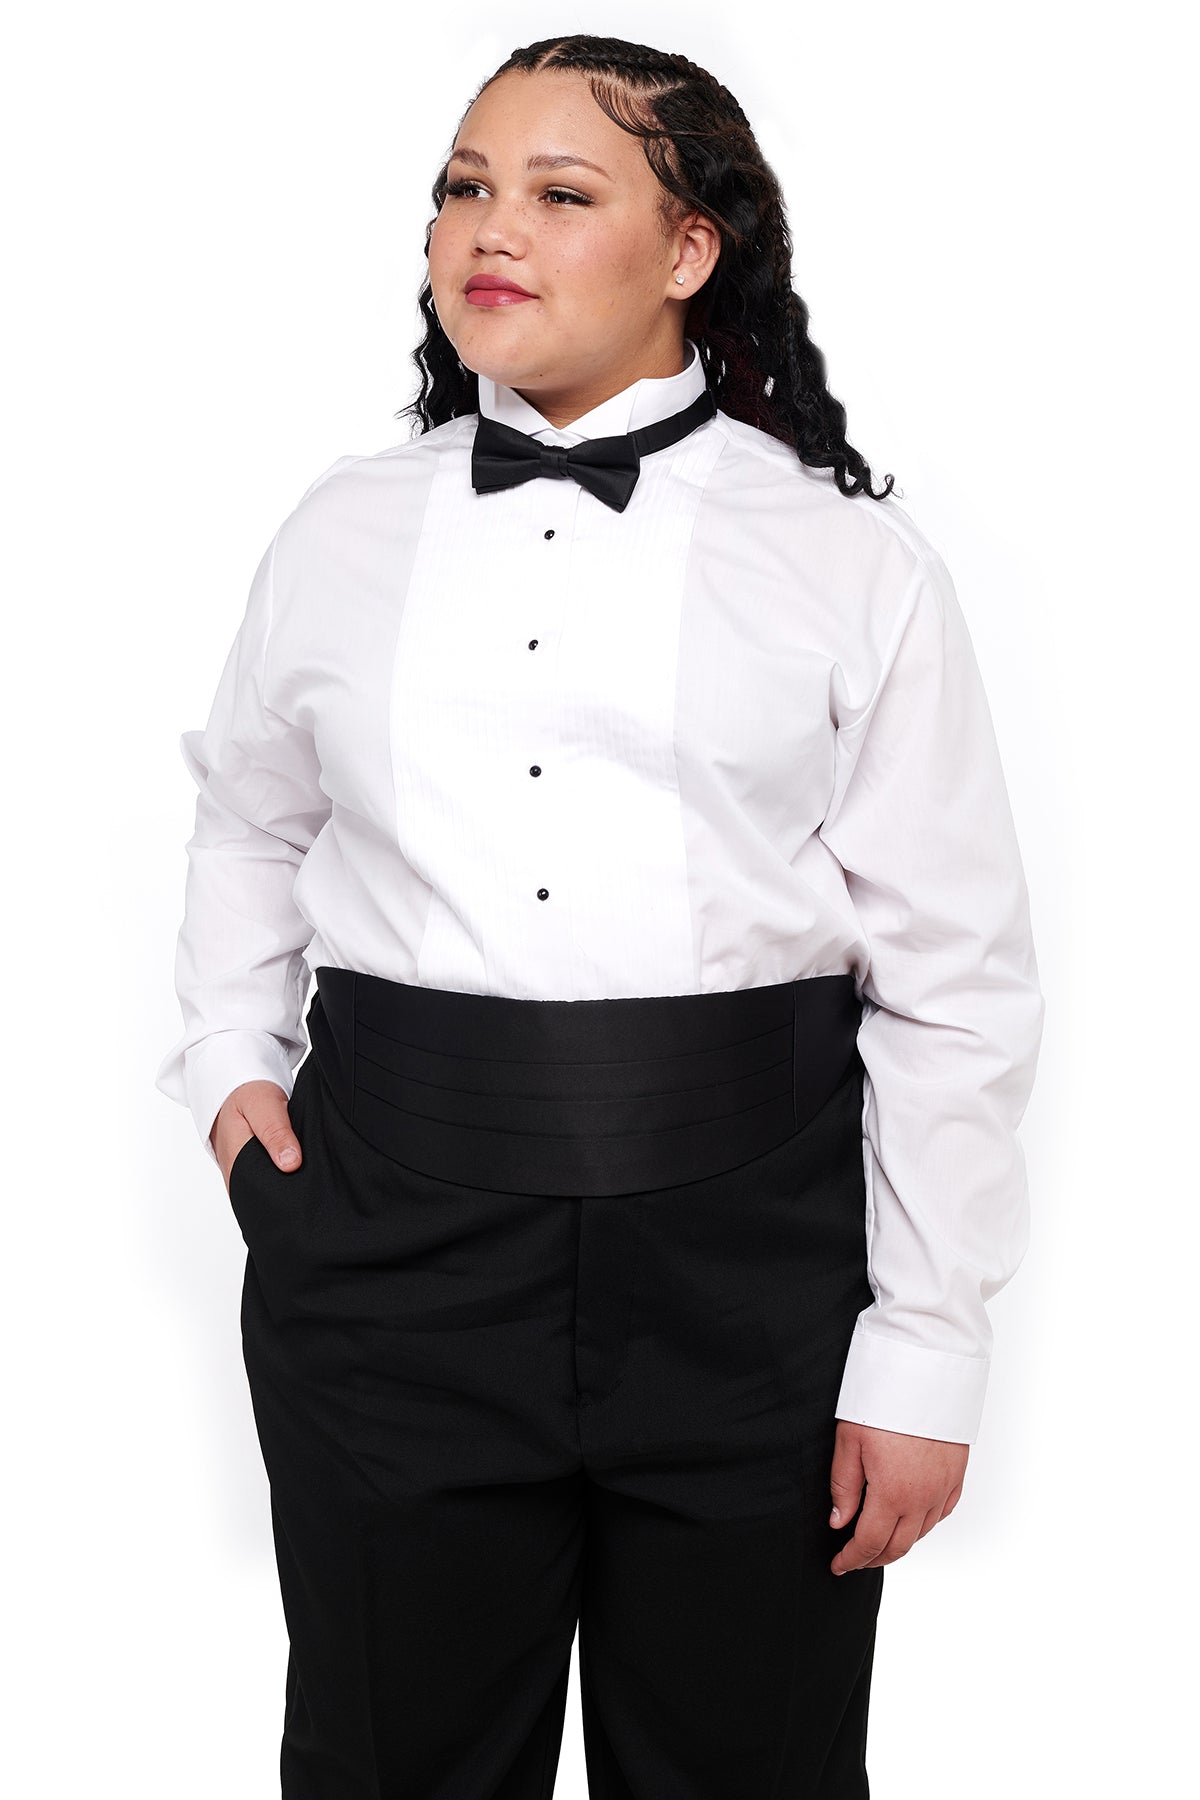 MARCELLO (Style #6700L) - Tuxedo Shirt Package - Gals